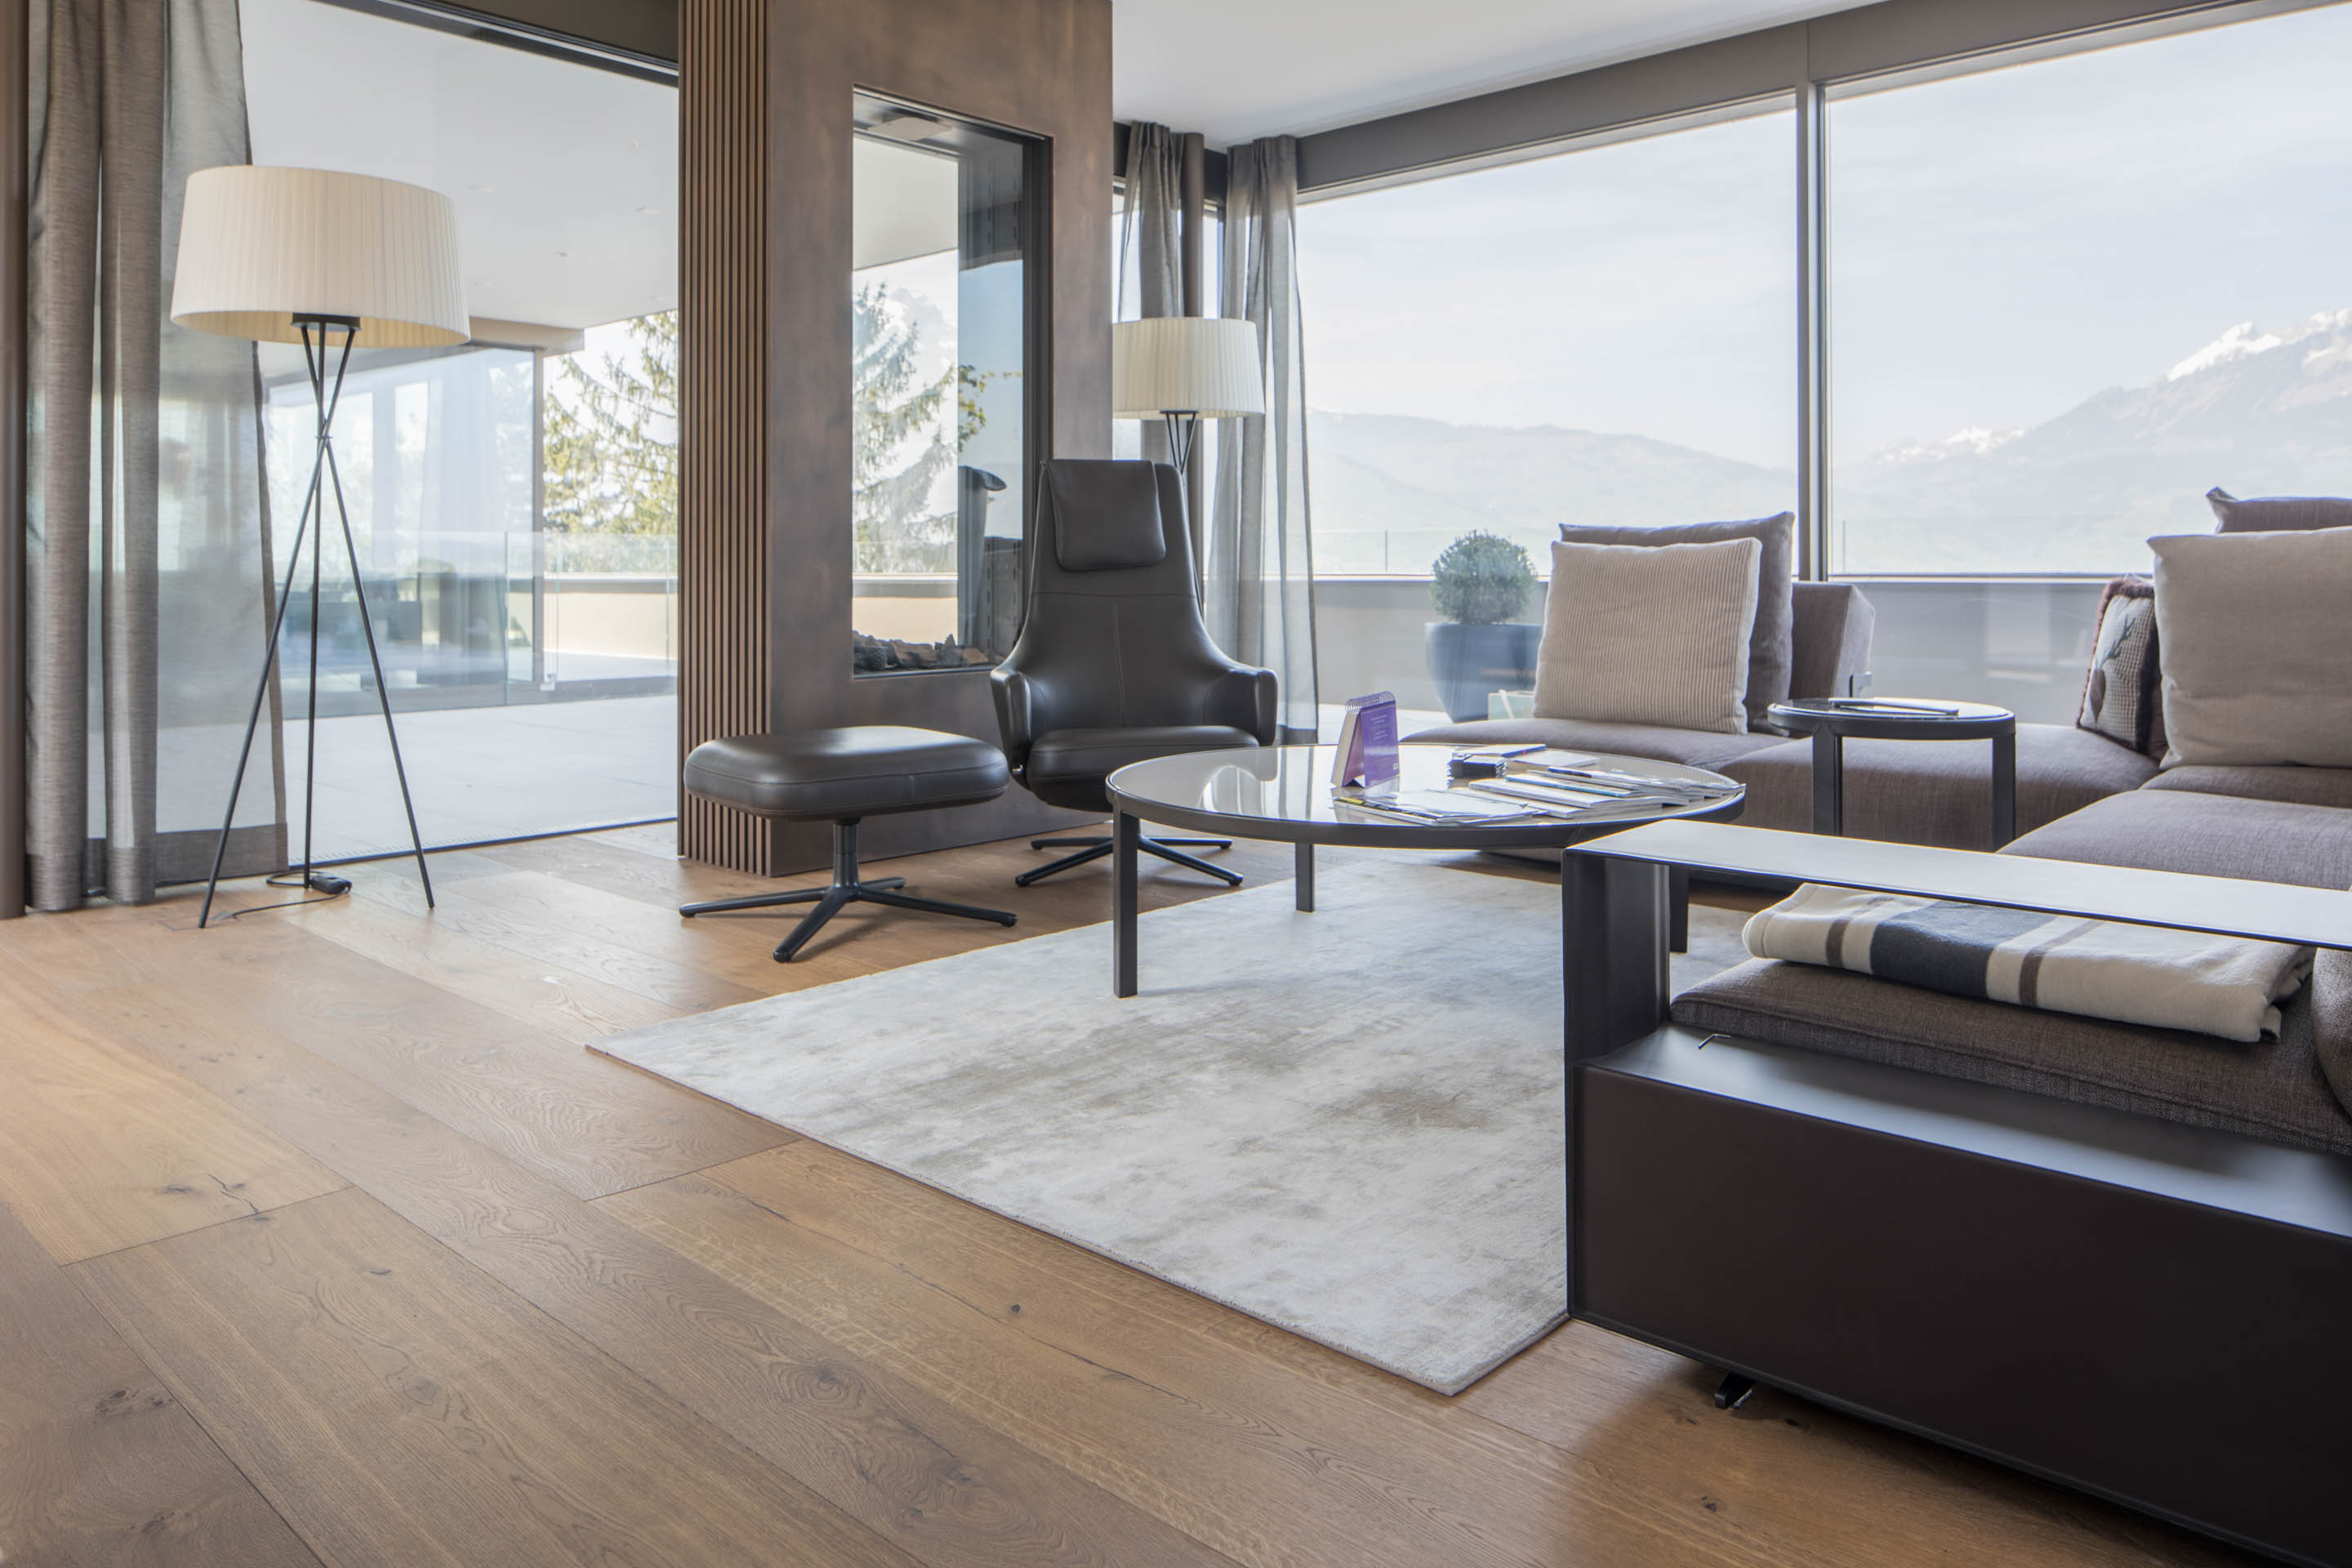 PRIVATE PENTHOUSE | Parquet collection "Fuerstliche Maxi-Dielen" oak smoked color 001 brushed